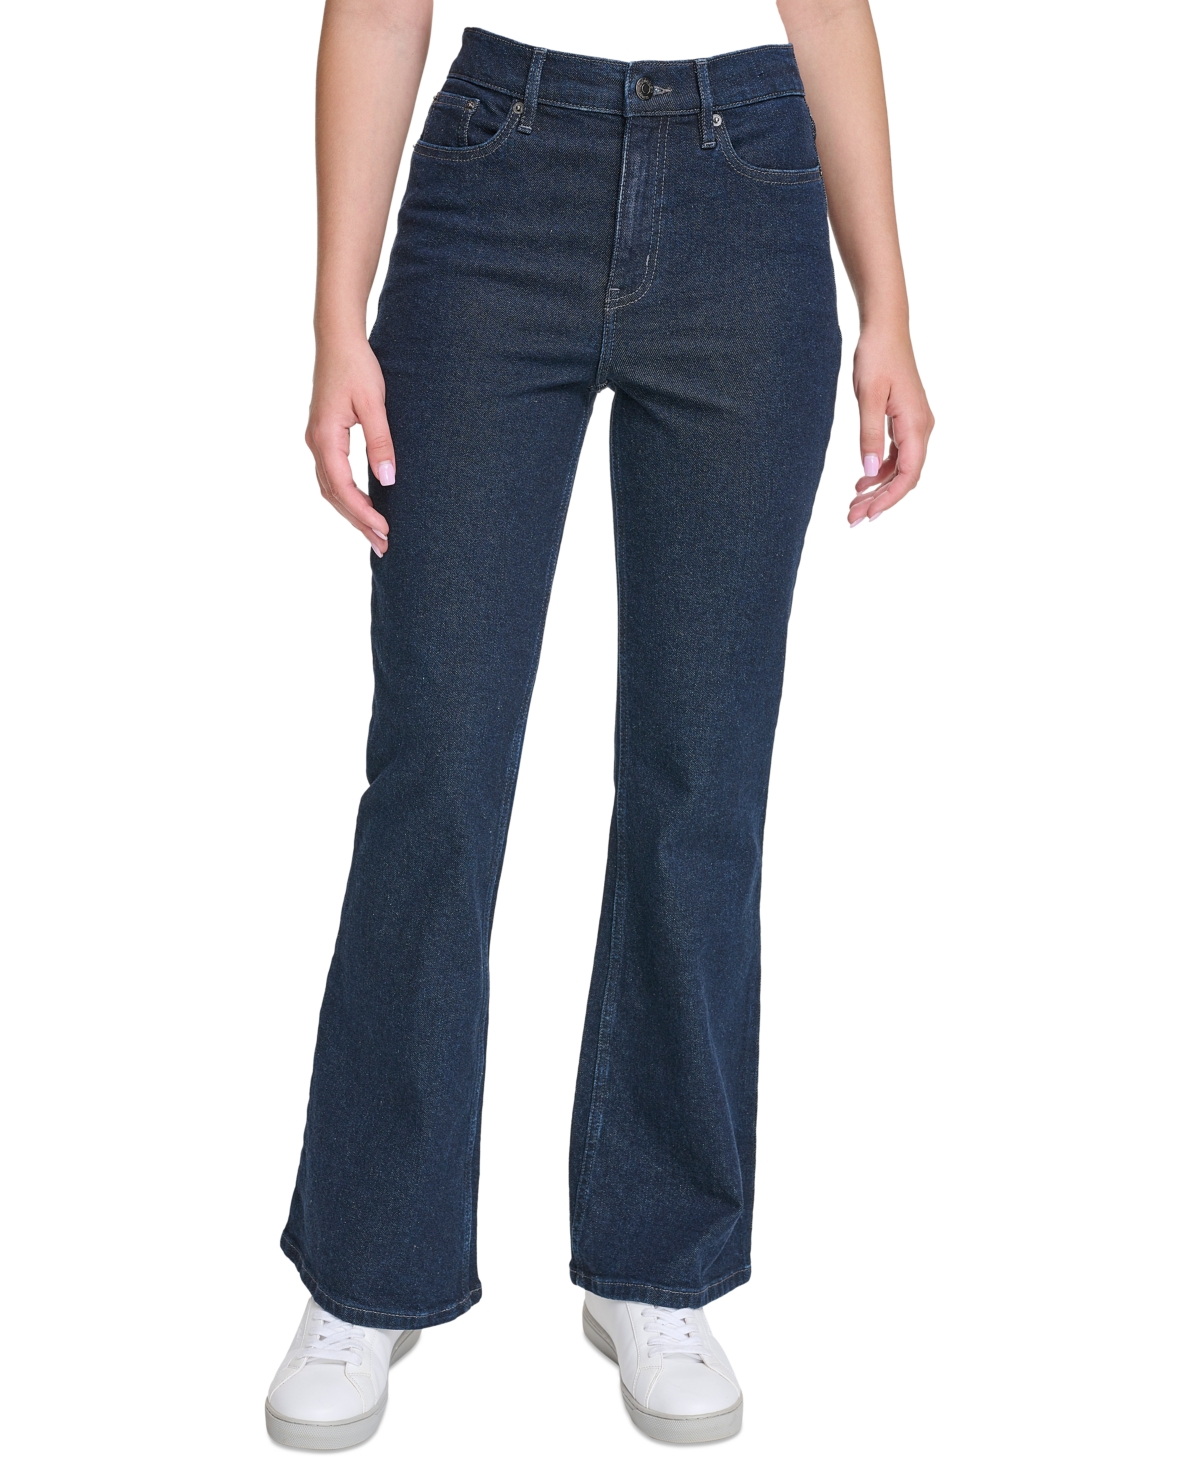 Women's High-Rise Stretch Flare Jeans - Concord